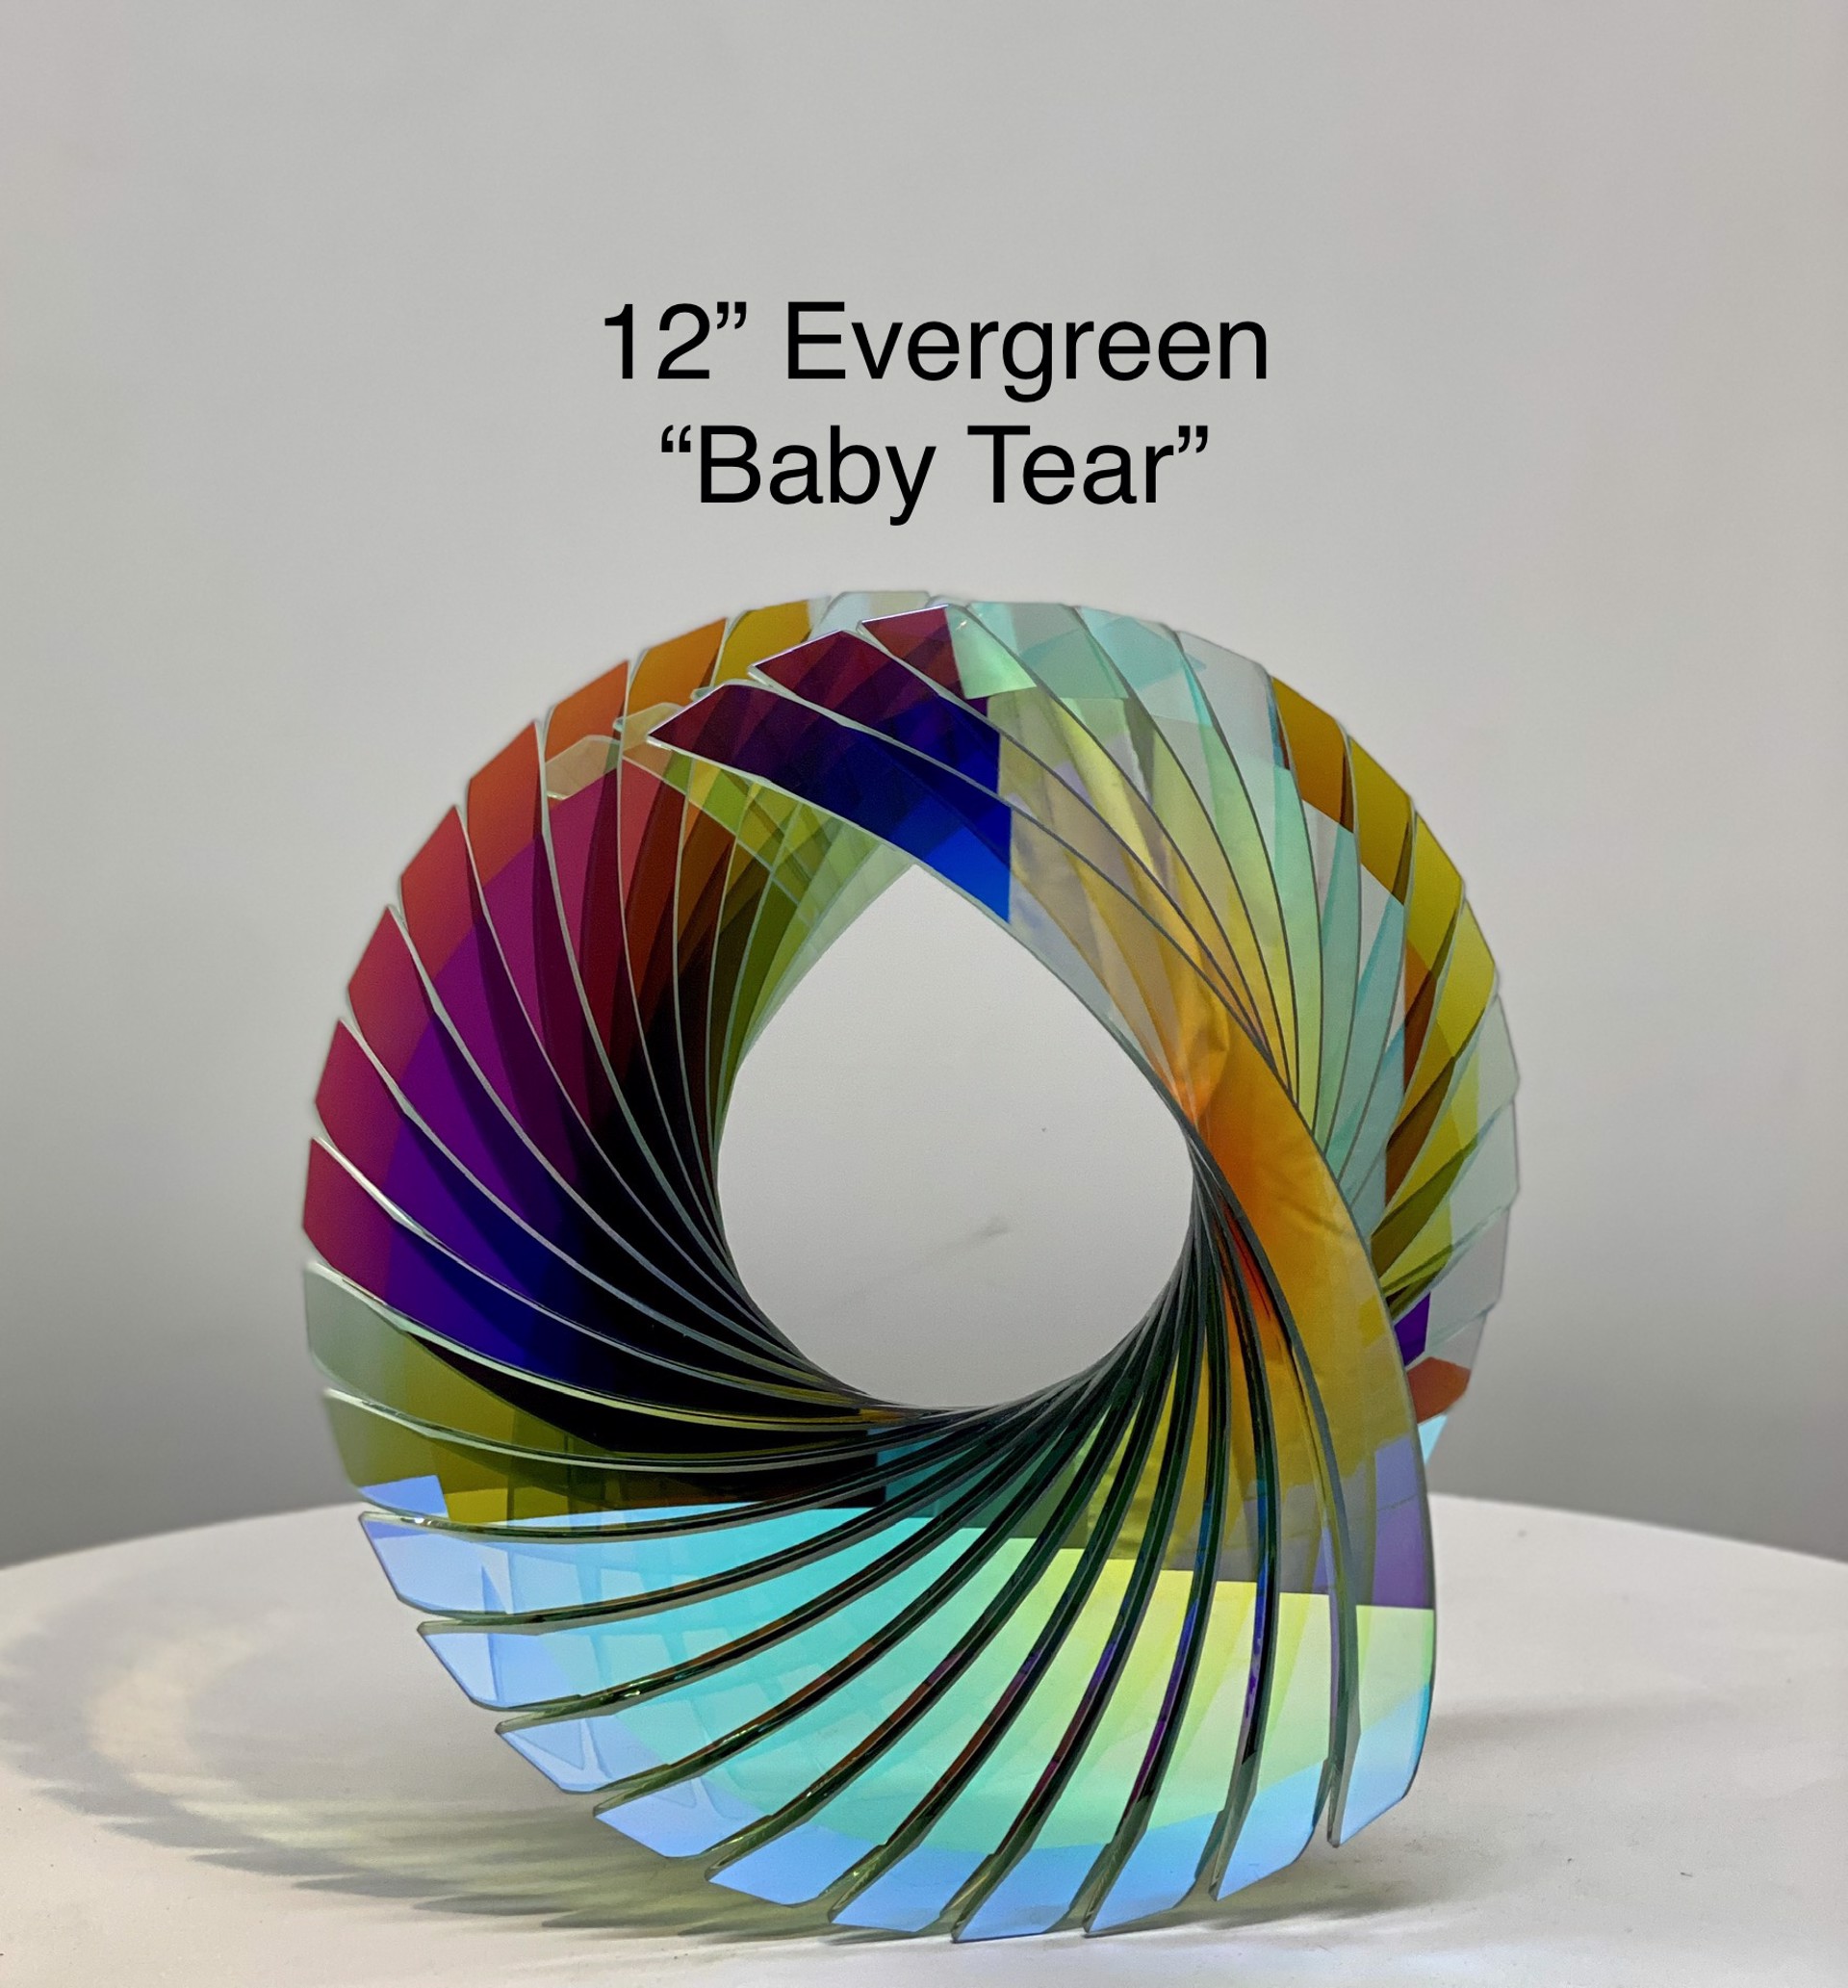 Baby Tear (Evergreen with dichroic) by Tom Marosz